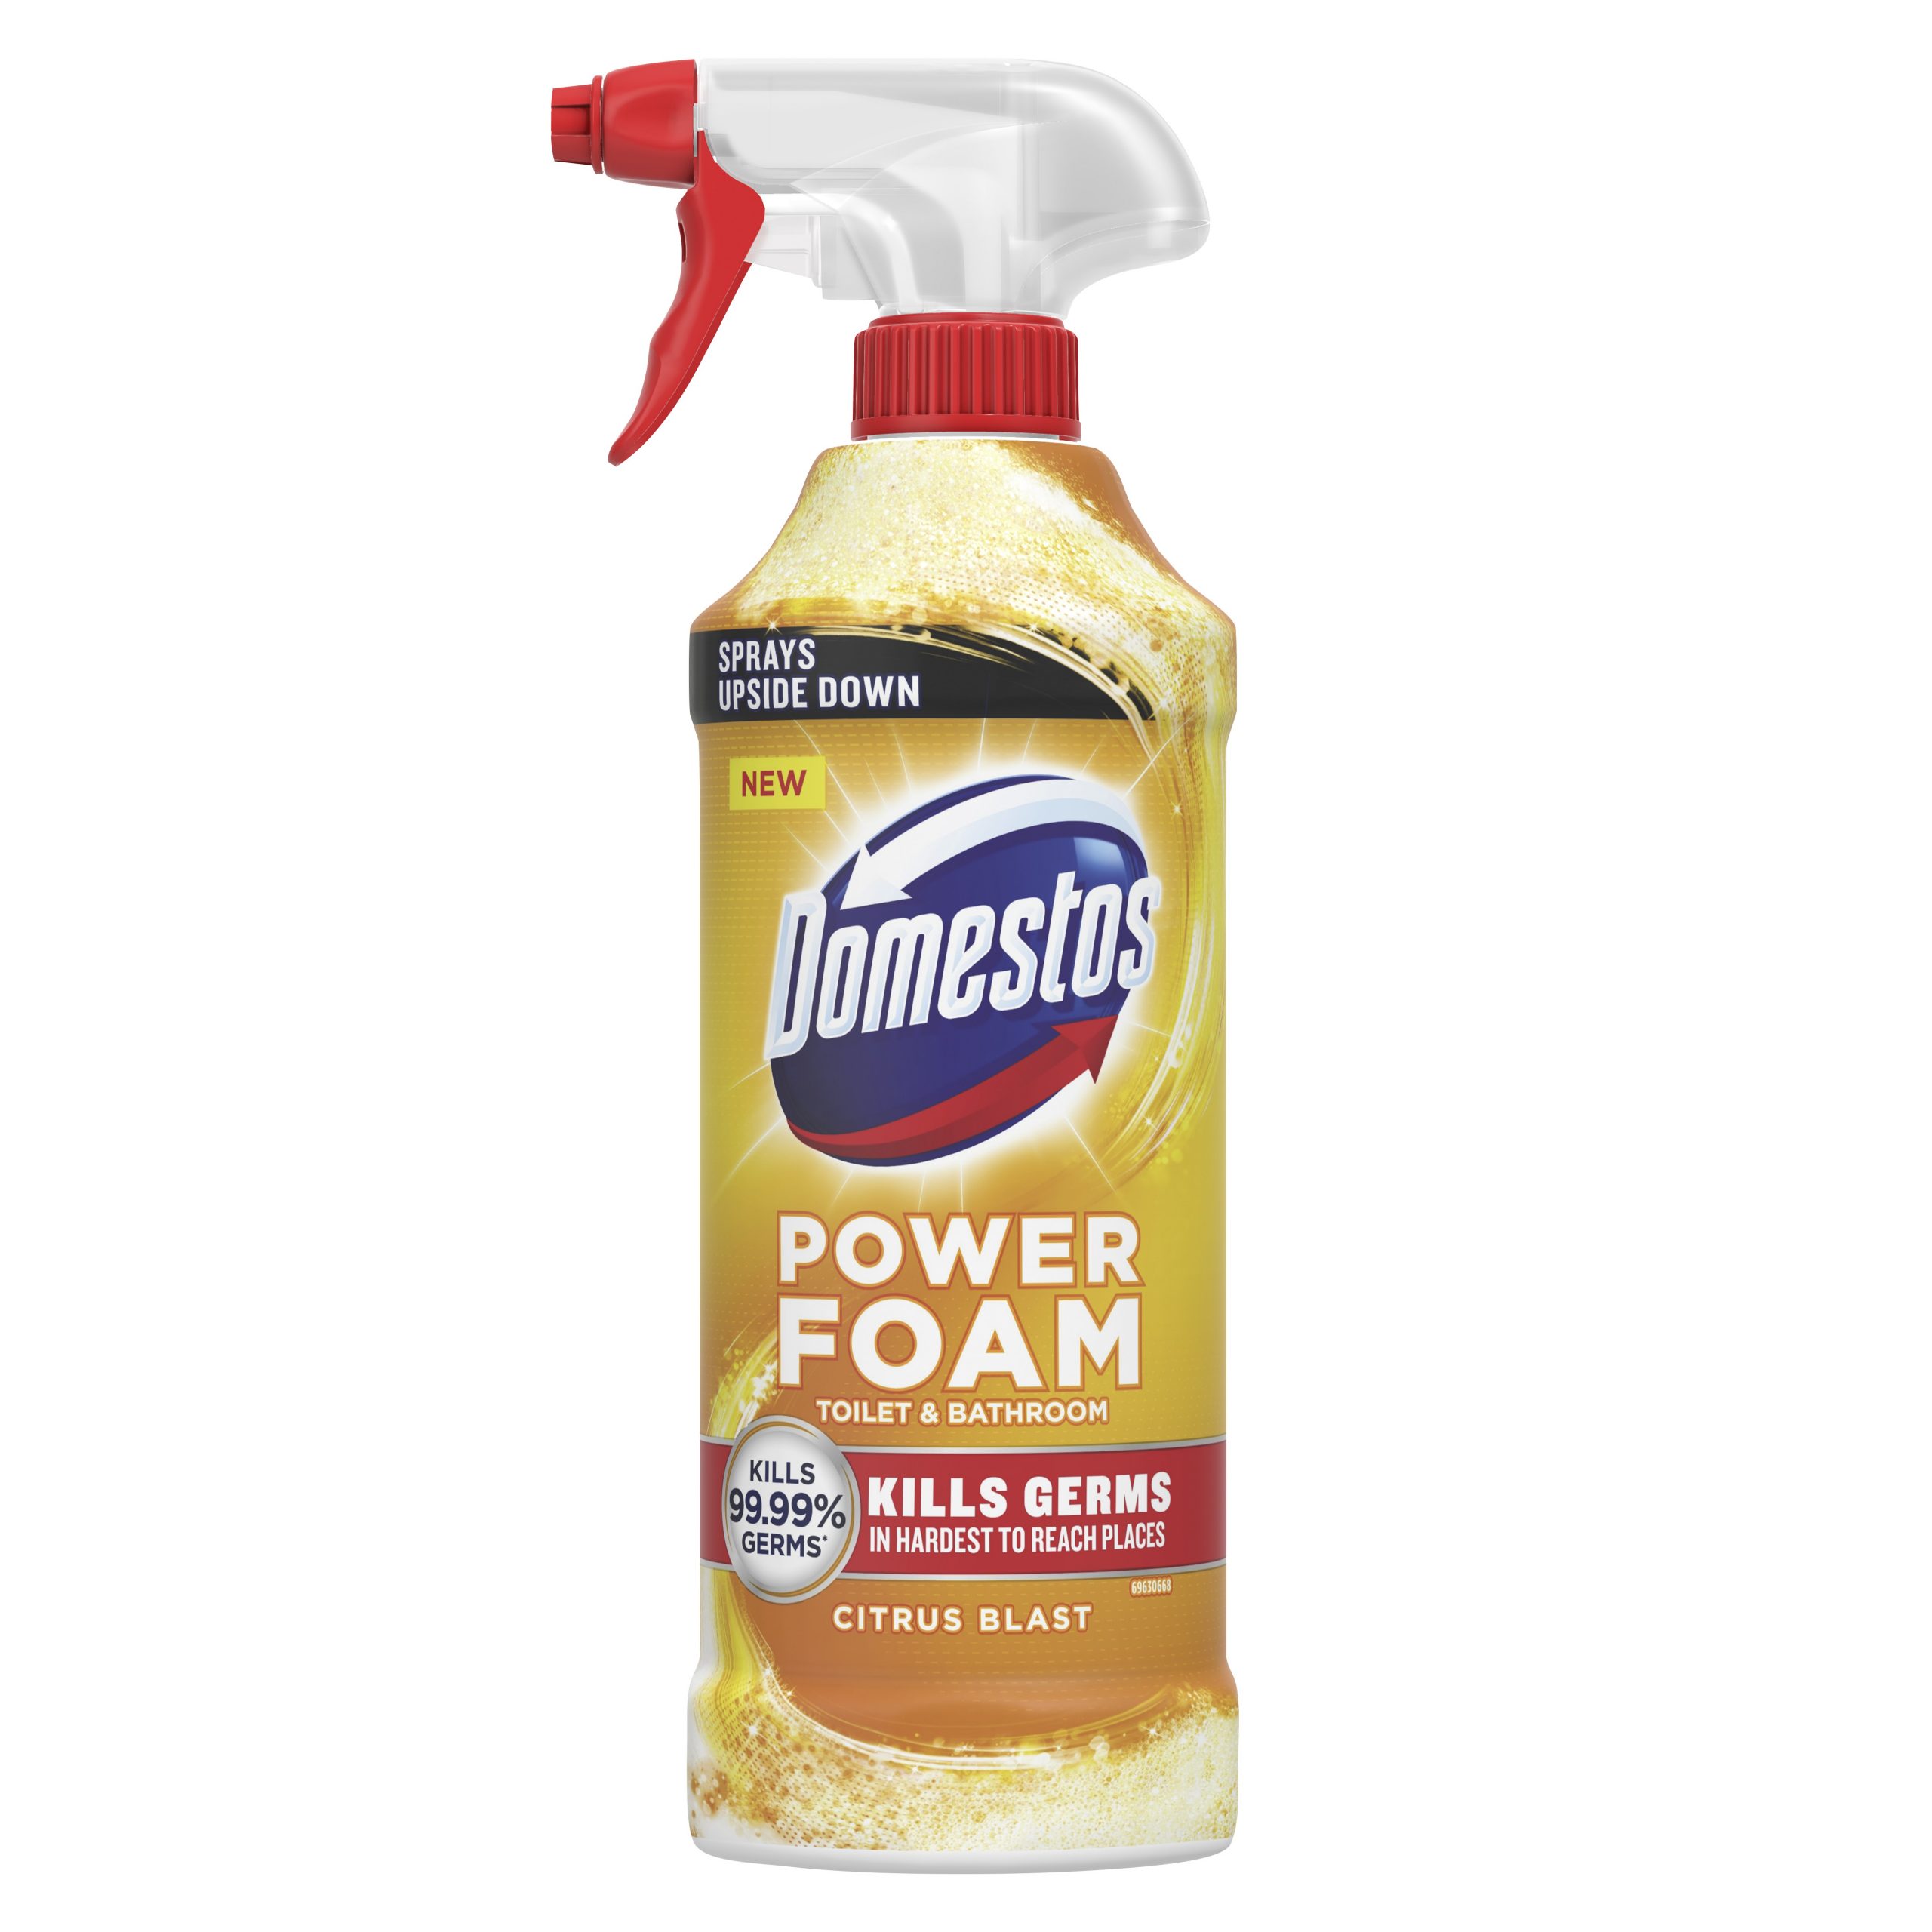 Domestos launches first-to-market 360 degree power foam spray